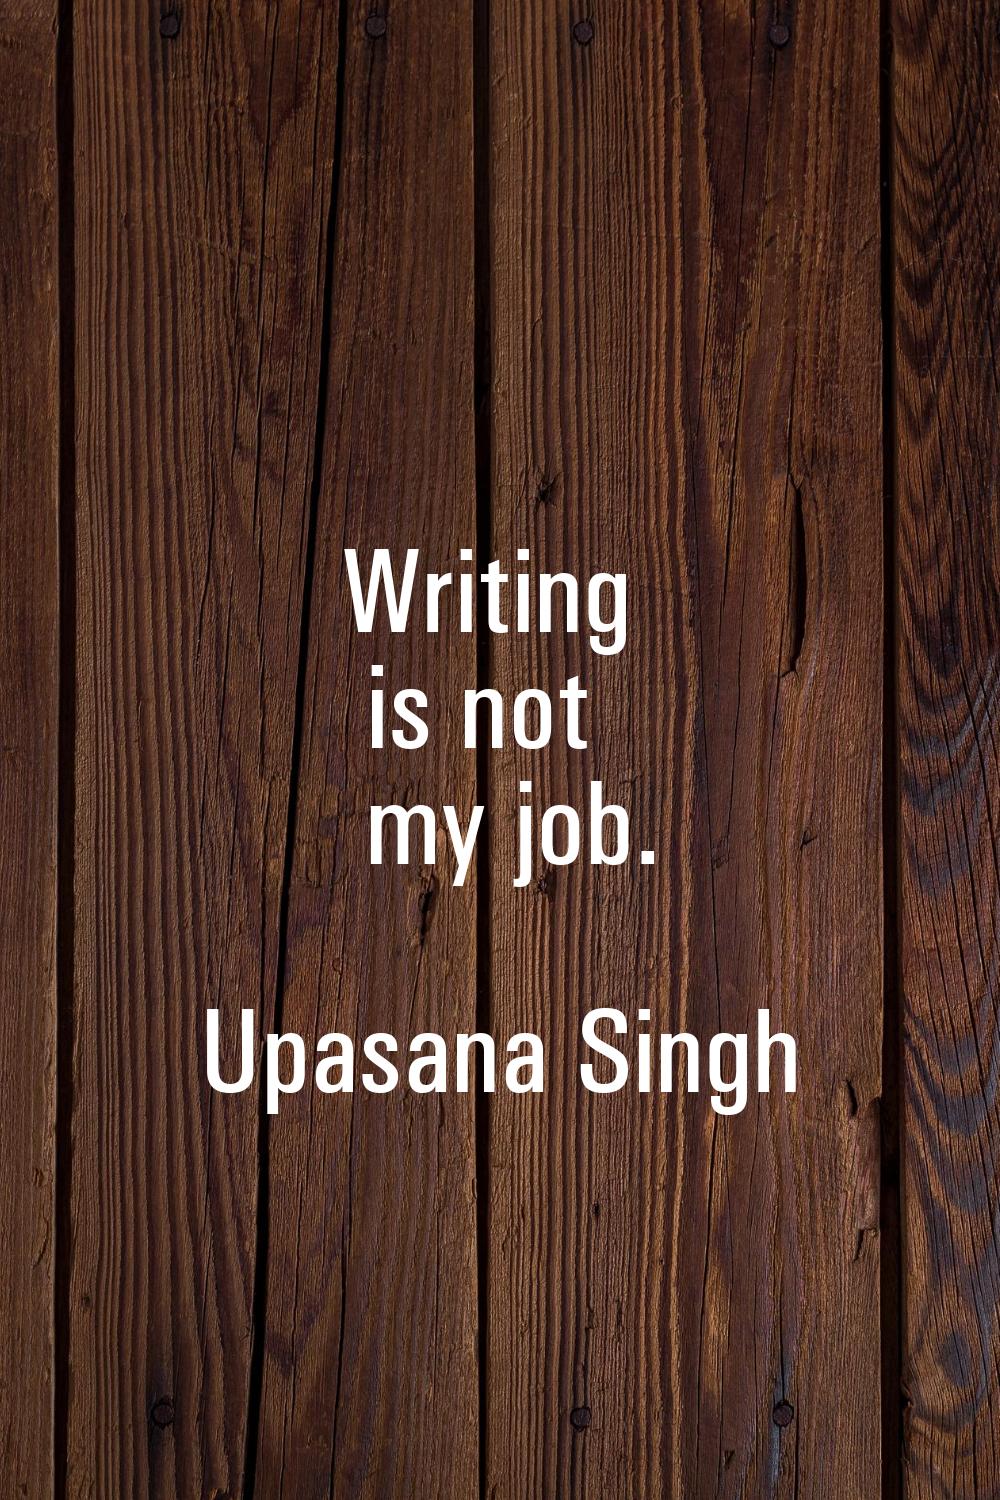 Writing is not my job.